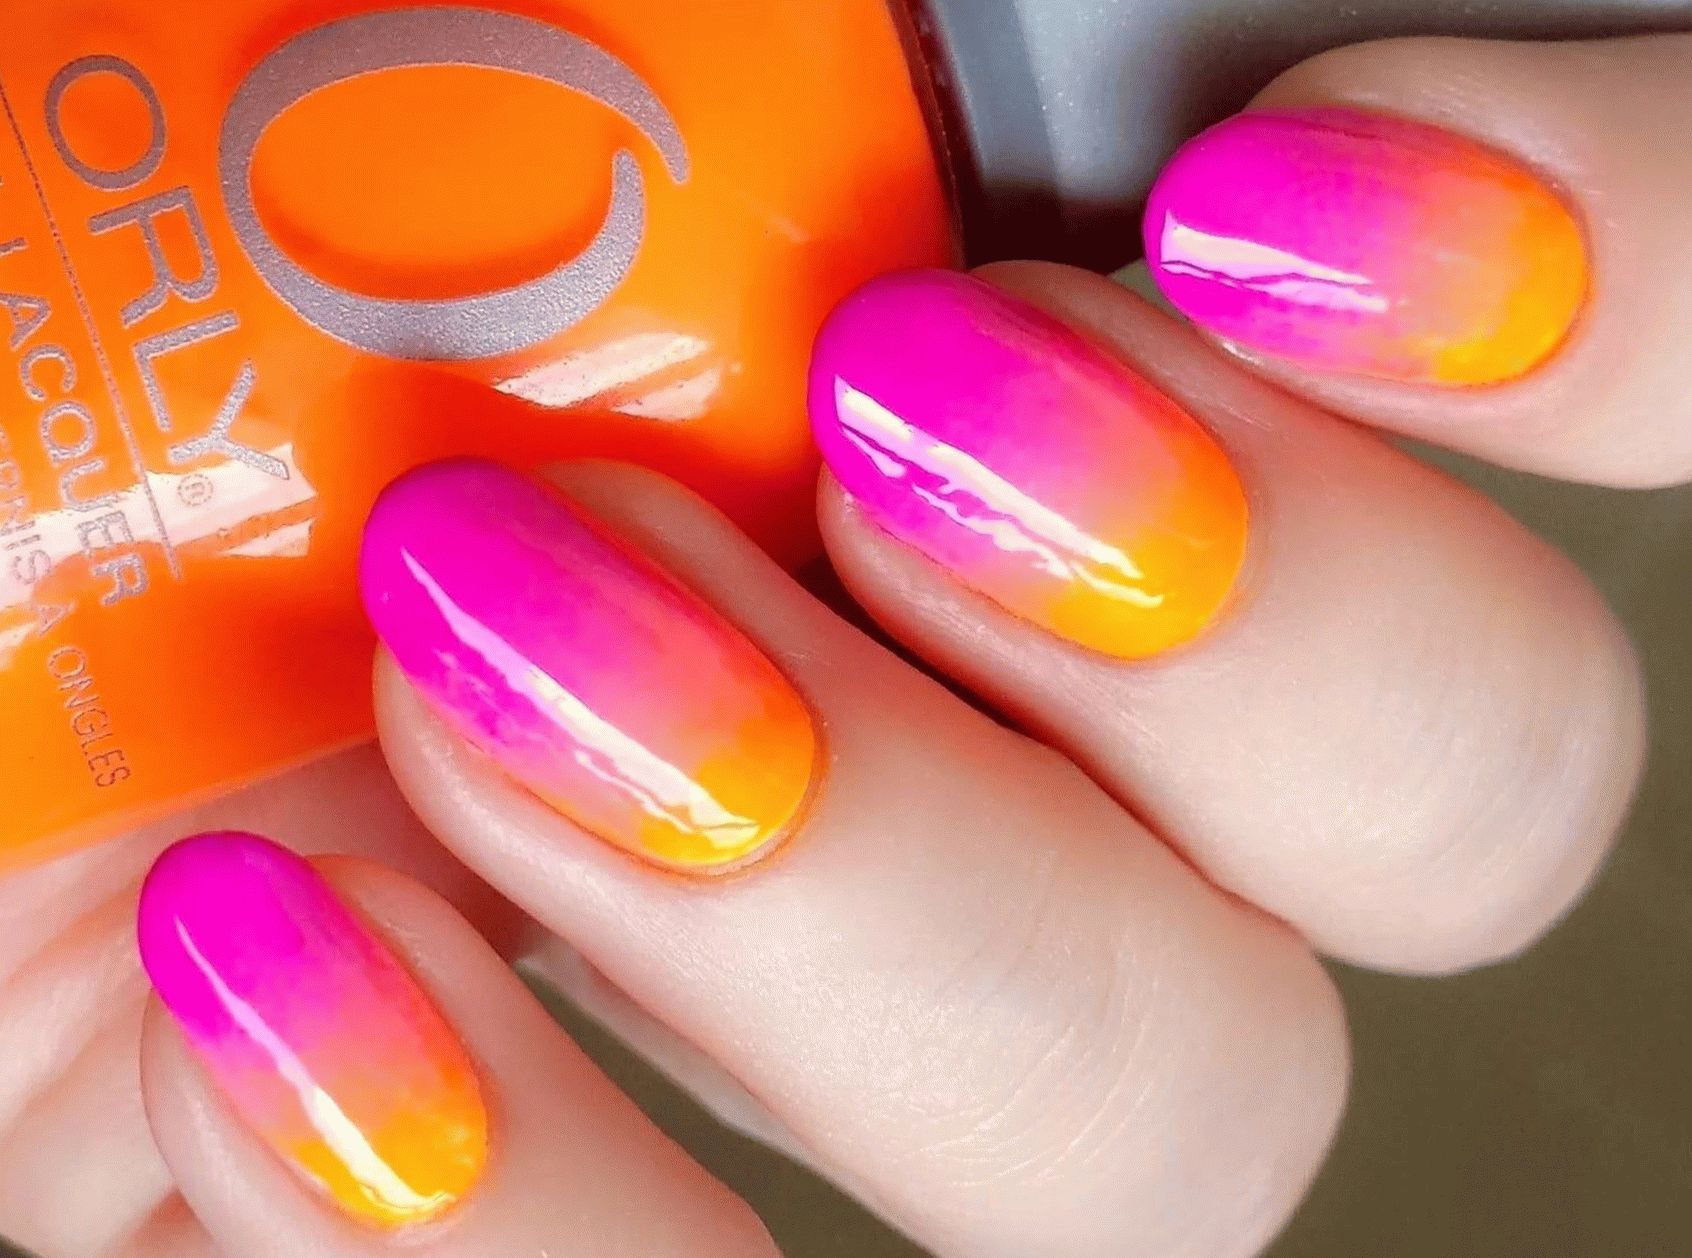 Variant of bright ombre manicure